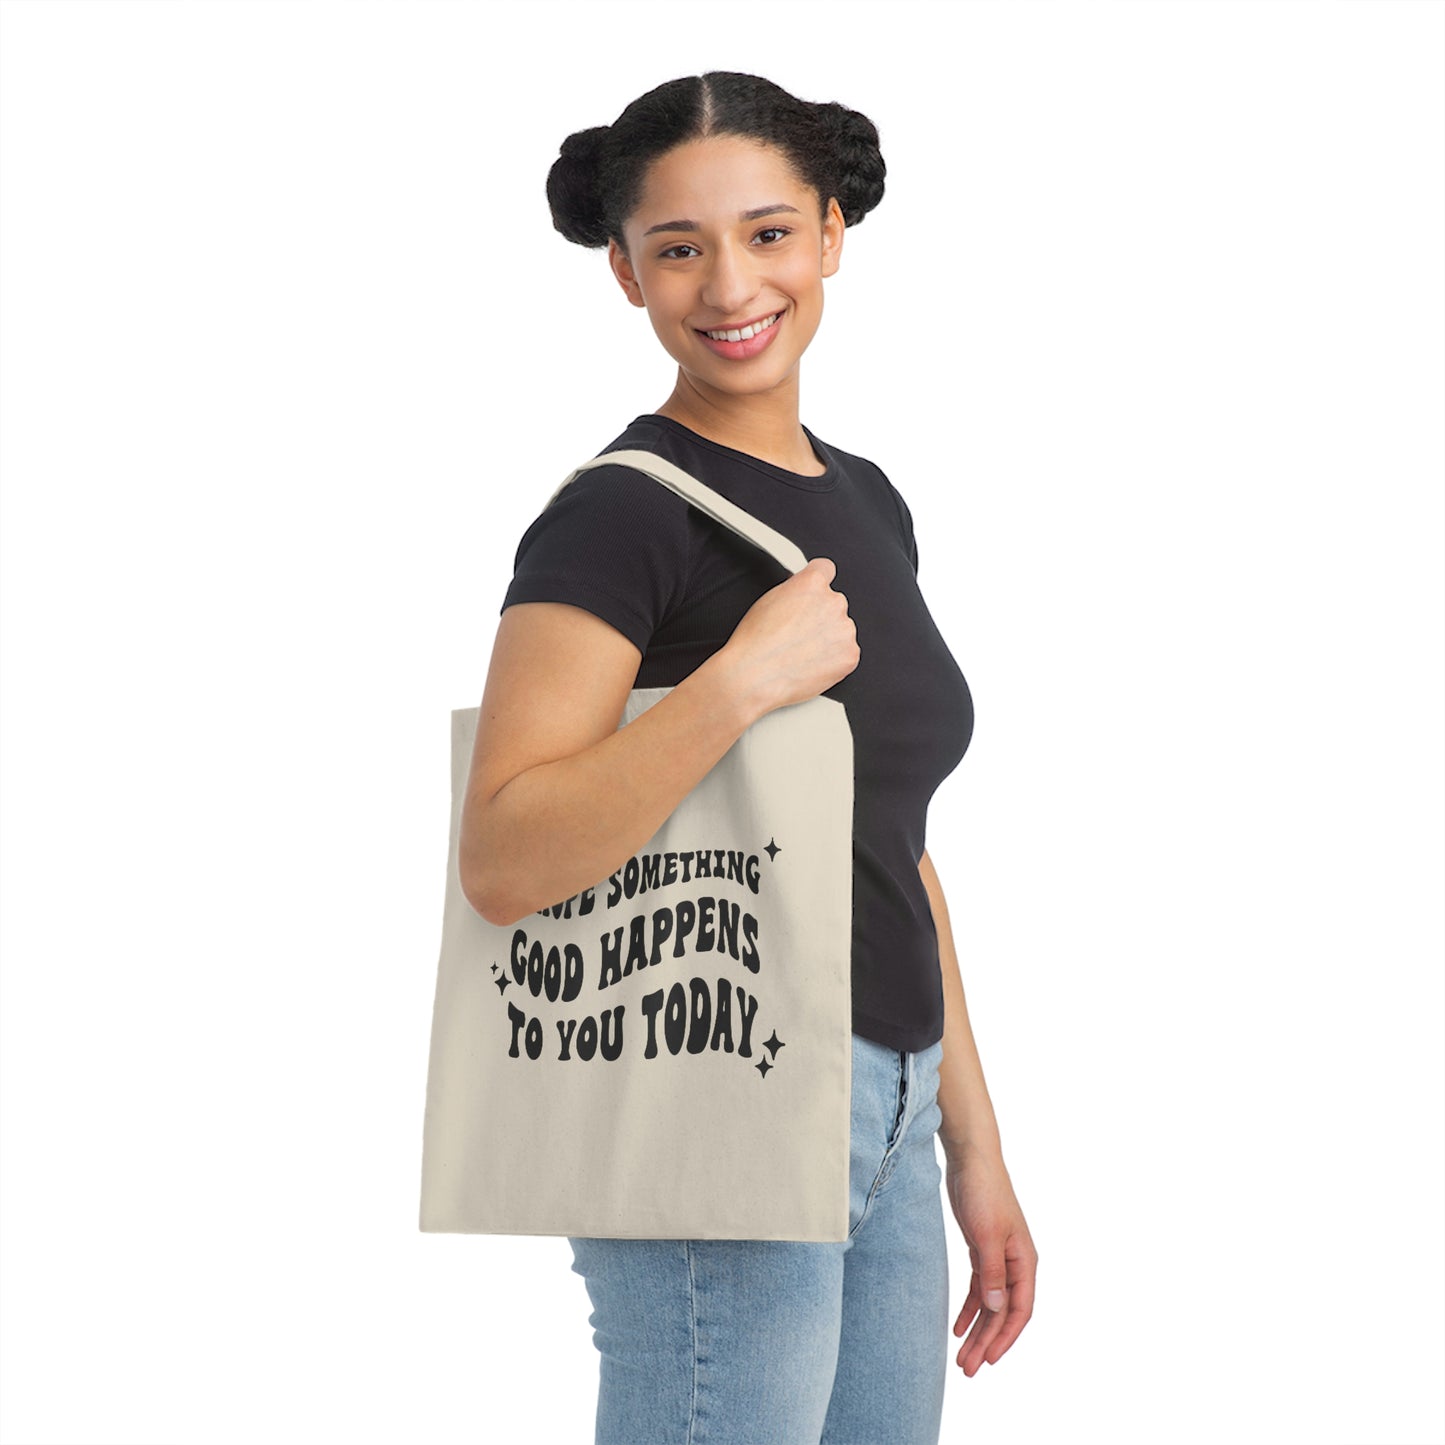 Retro Style Reusable Tote Bag With Wording I Hope Something Good Happens To You Today